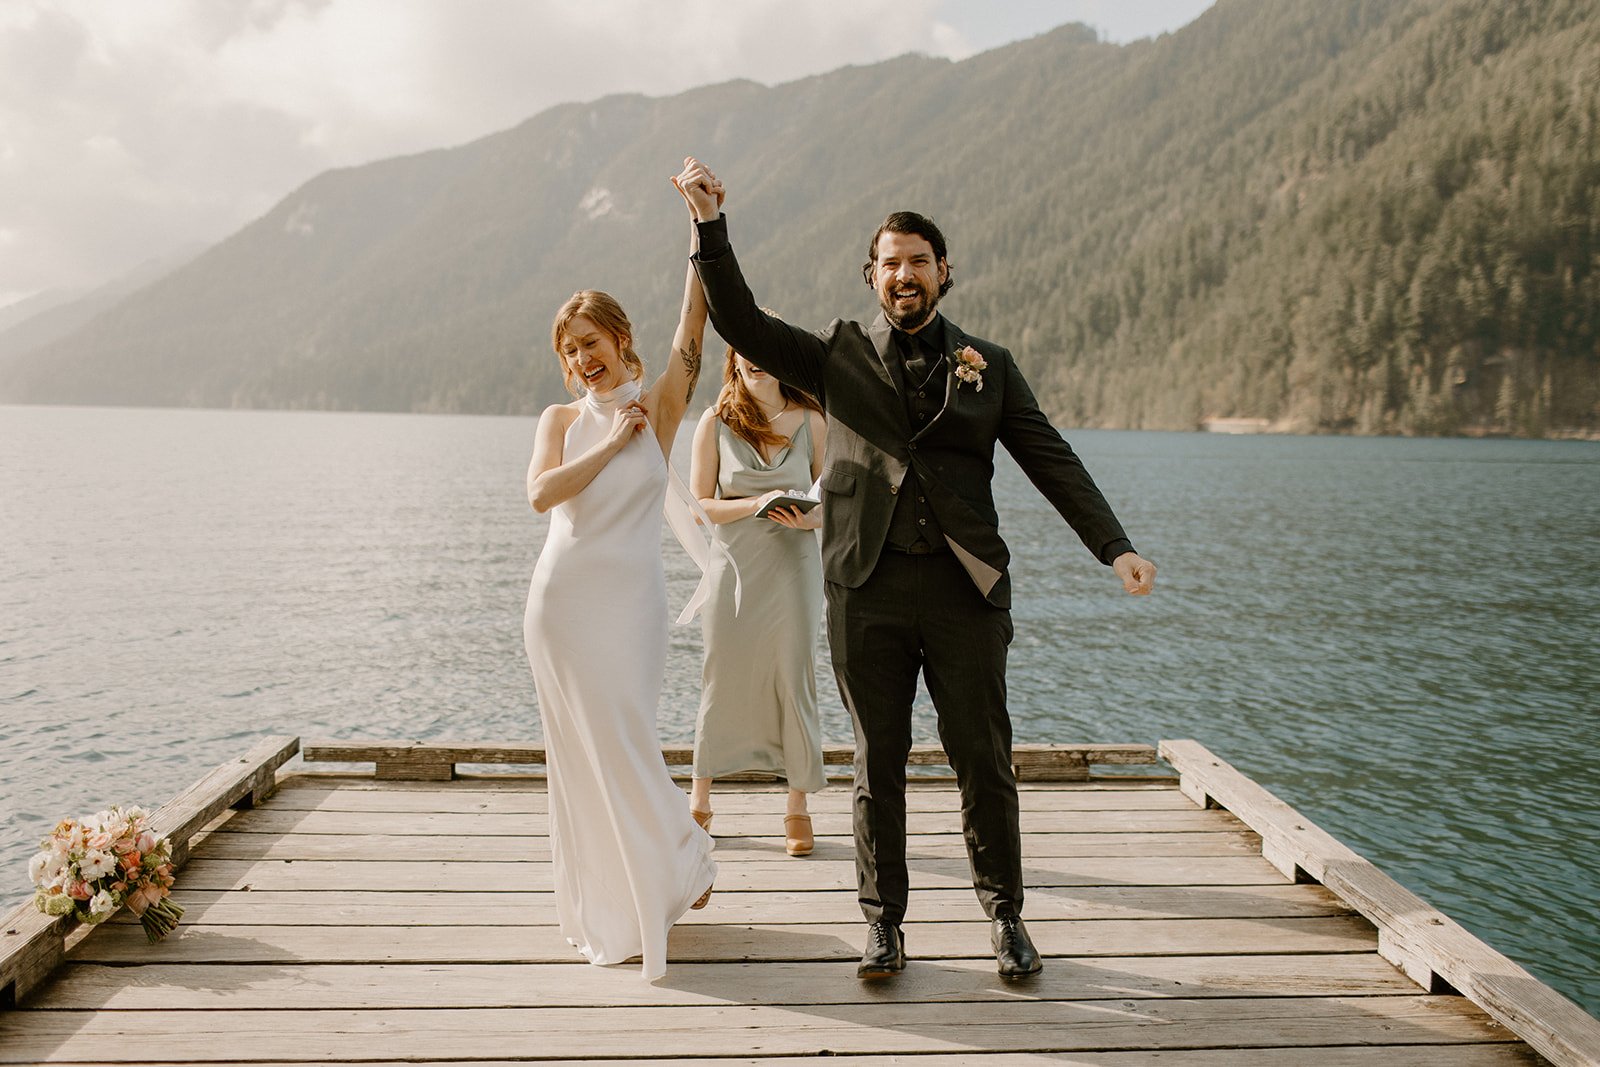 Bride and Groom fist pumping in celebration after their ceremony at Lake Crescent in Washington